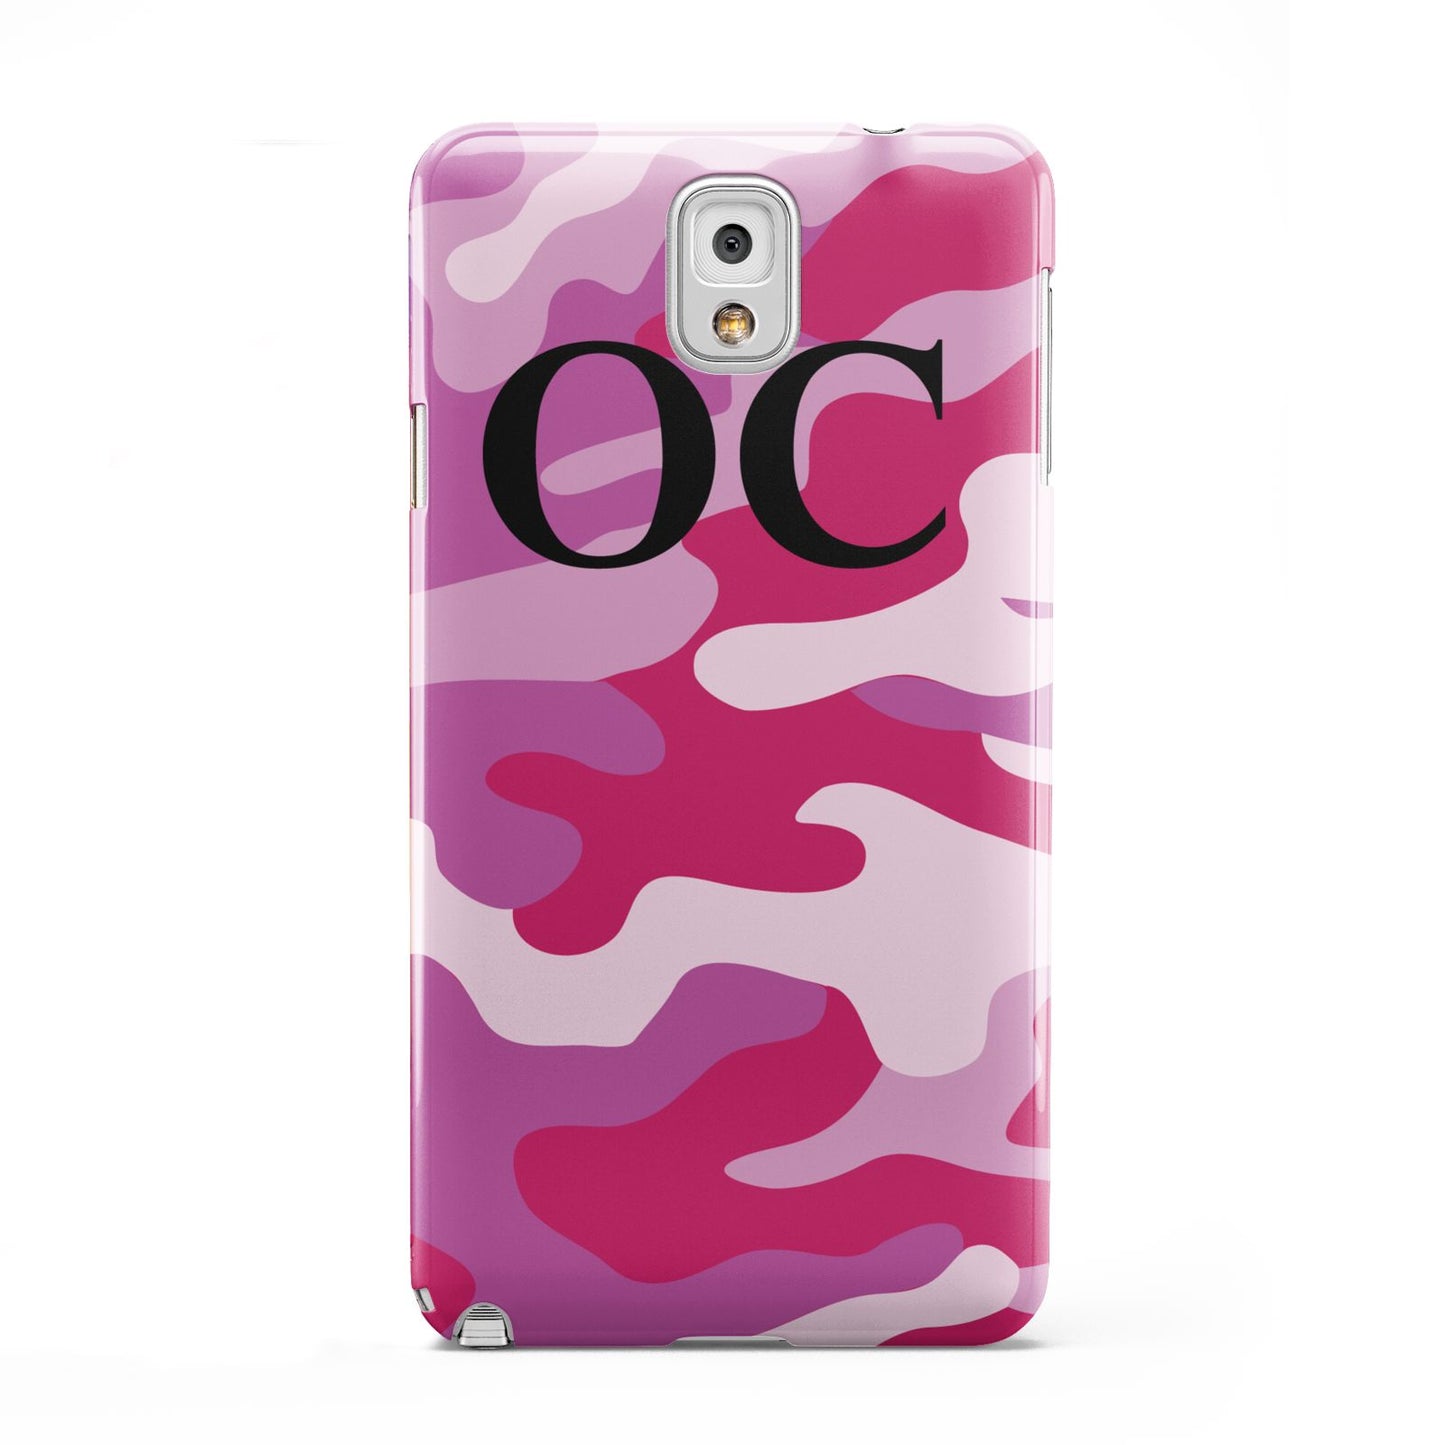 Camouflage Personalised Samsung Galaxy Note 3 Case